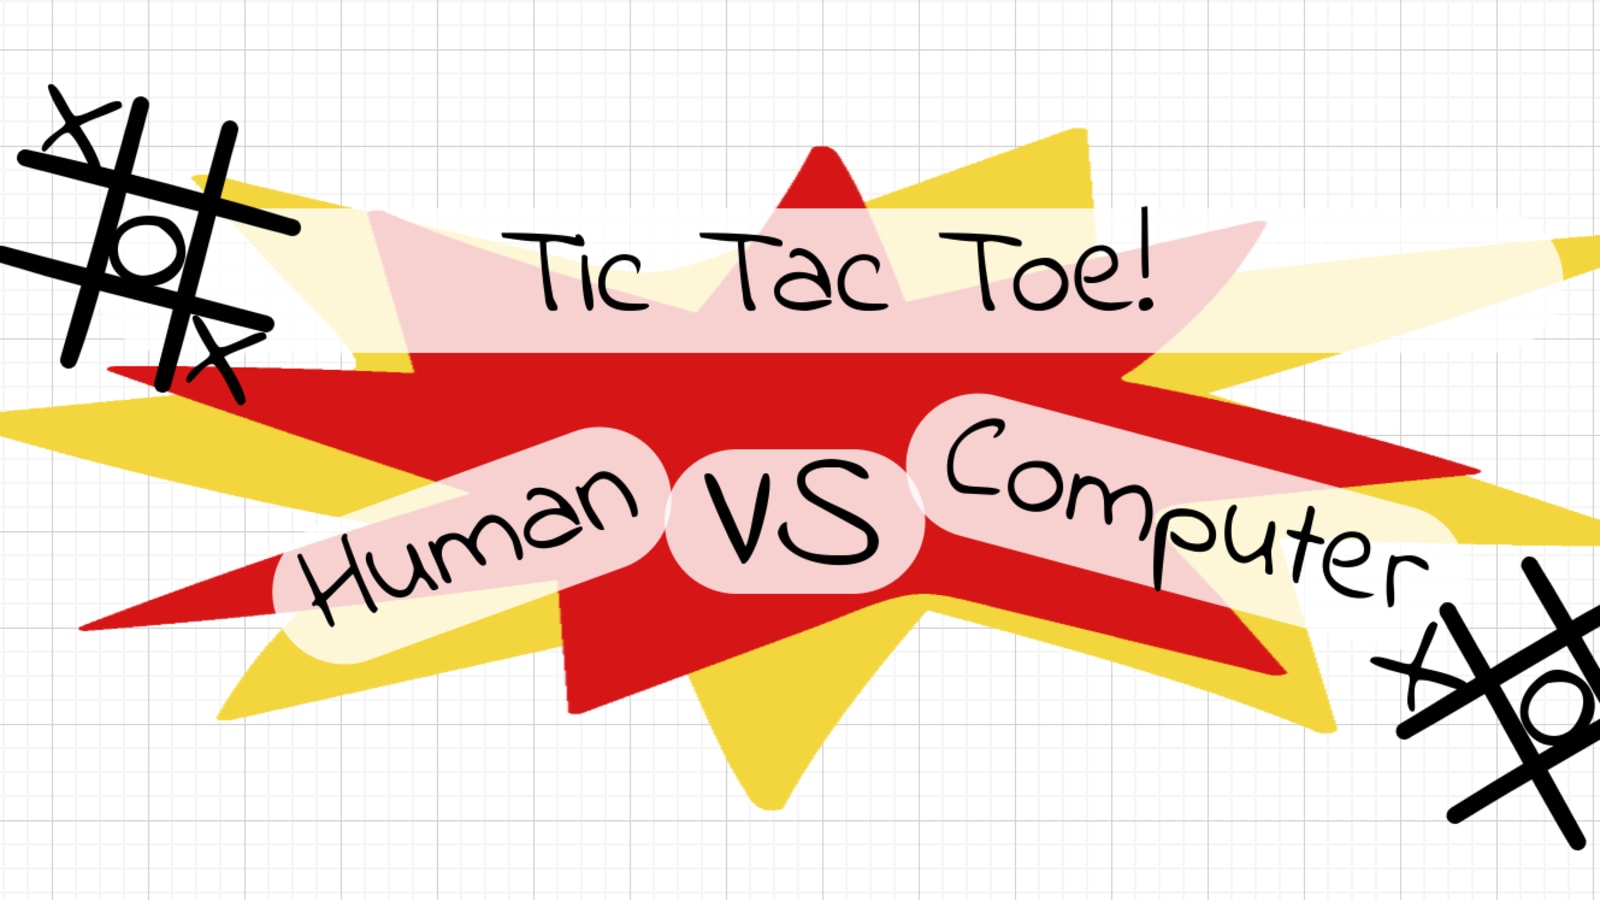 Self-built Tic-tac-toe AIs vs Human - The ultimate showdown in five rounds,  from dumbed down to highly sophisticated 🥊🏆 - DEV Community